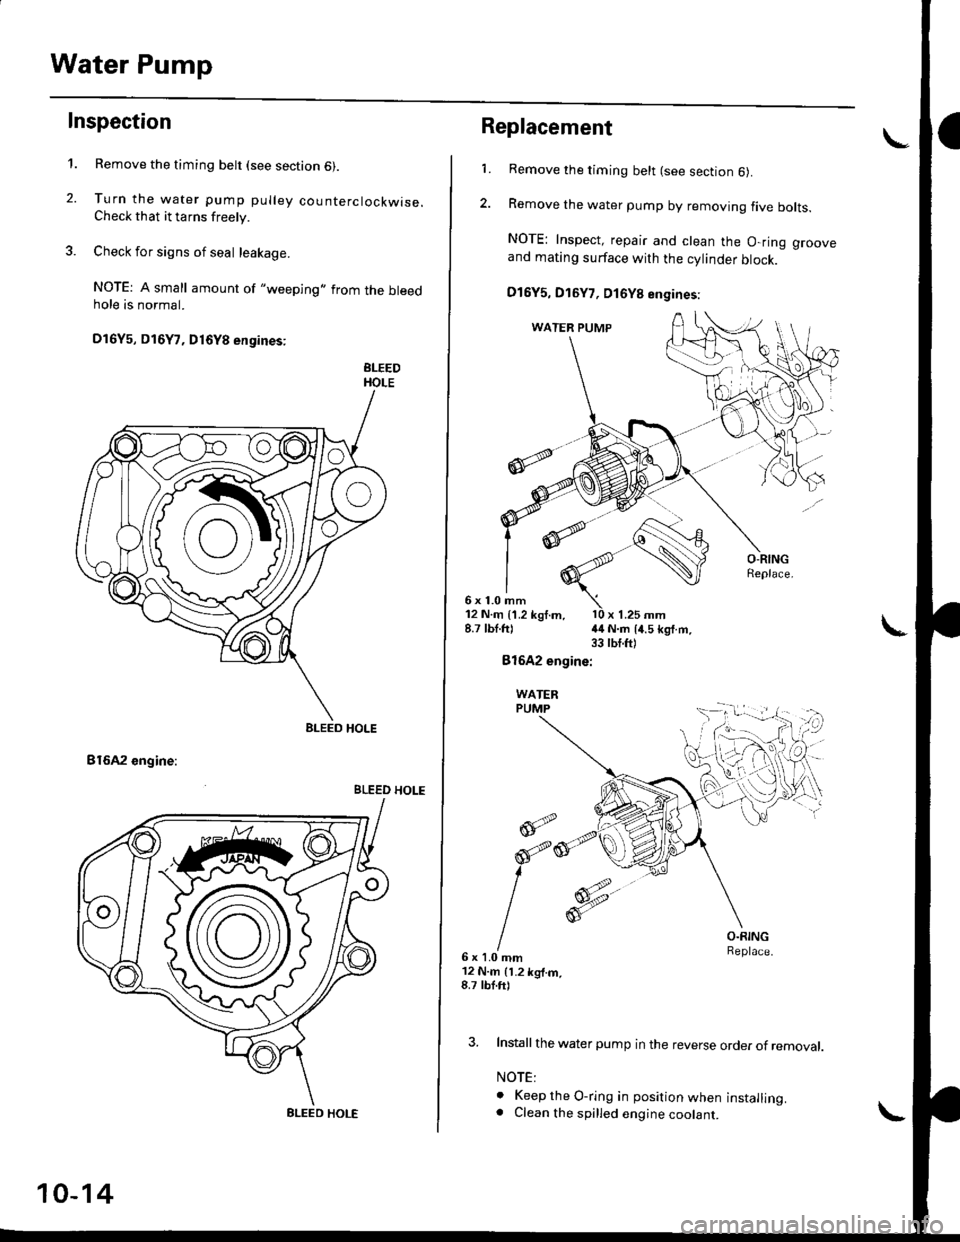 HONDA CIVIC 2000 6.G Workshop Manual Water Pump
Inspection
t.
2.
Remove the timing belt (see section 6).
Turn the water pump pulley counterclockwise.Check that it tarns freely.
Check for signs of seal leakage.
NOTE: A small amount of "w